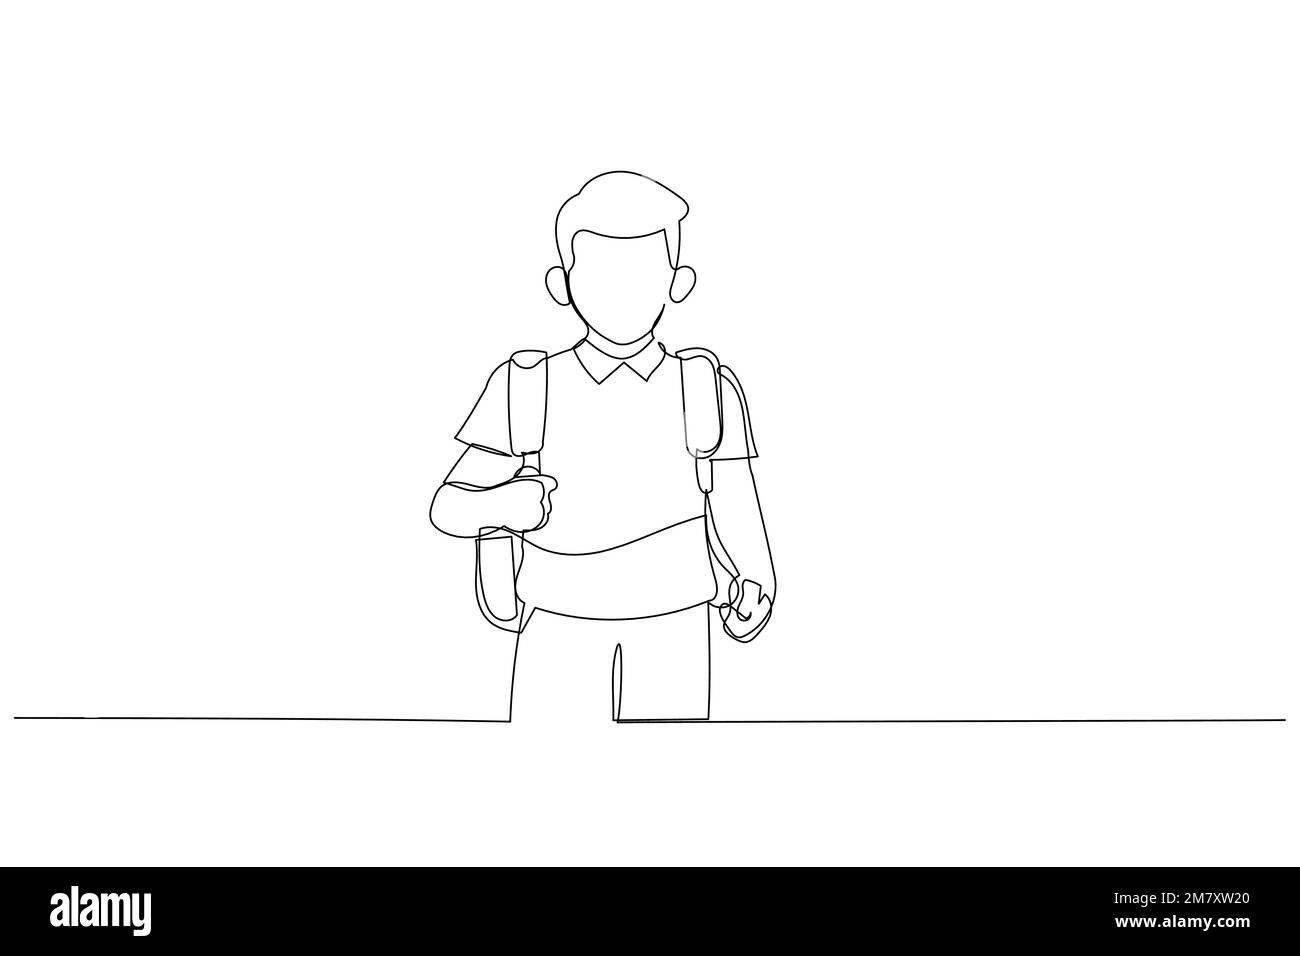 Illustration of boy going to school for the first time. Child with school bag and book. Single line art style Stock Vector